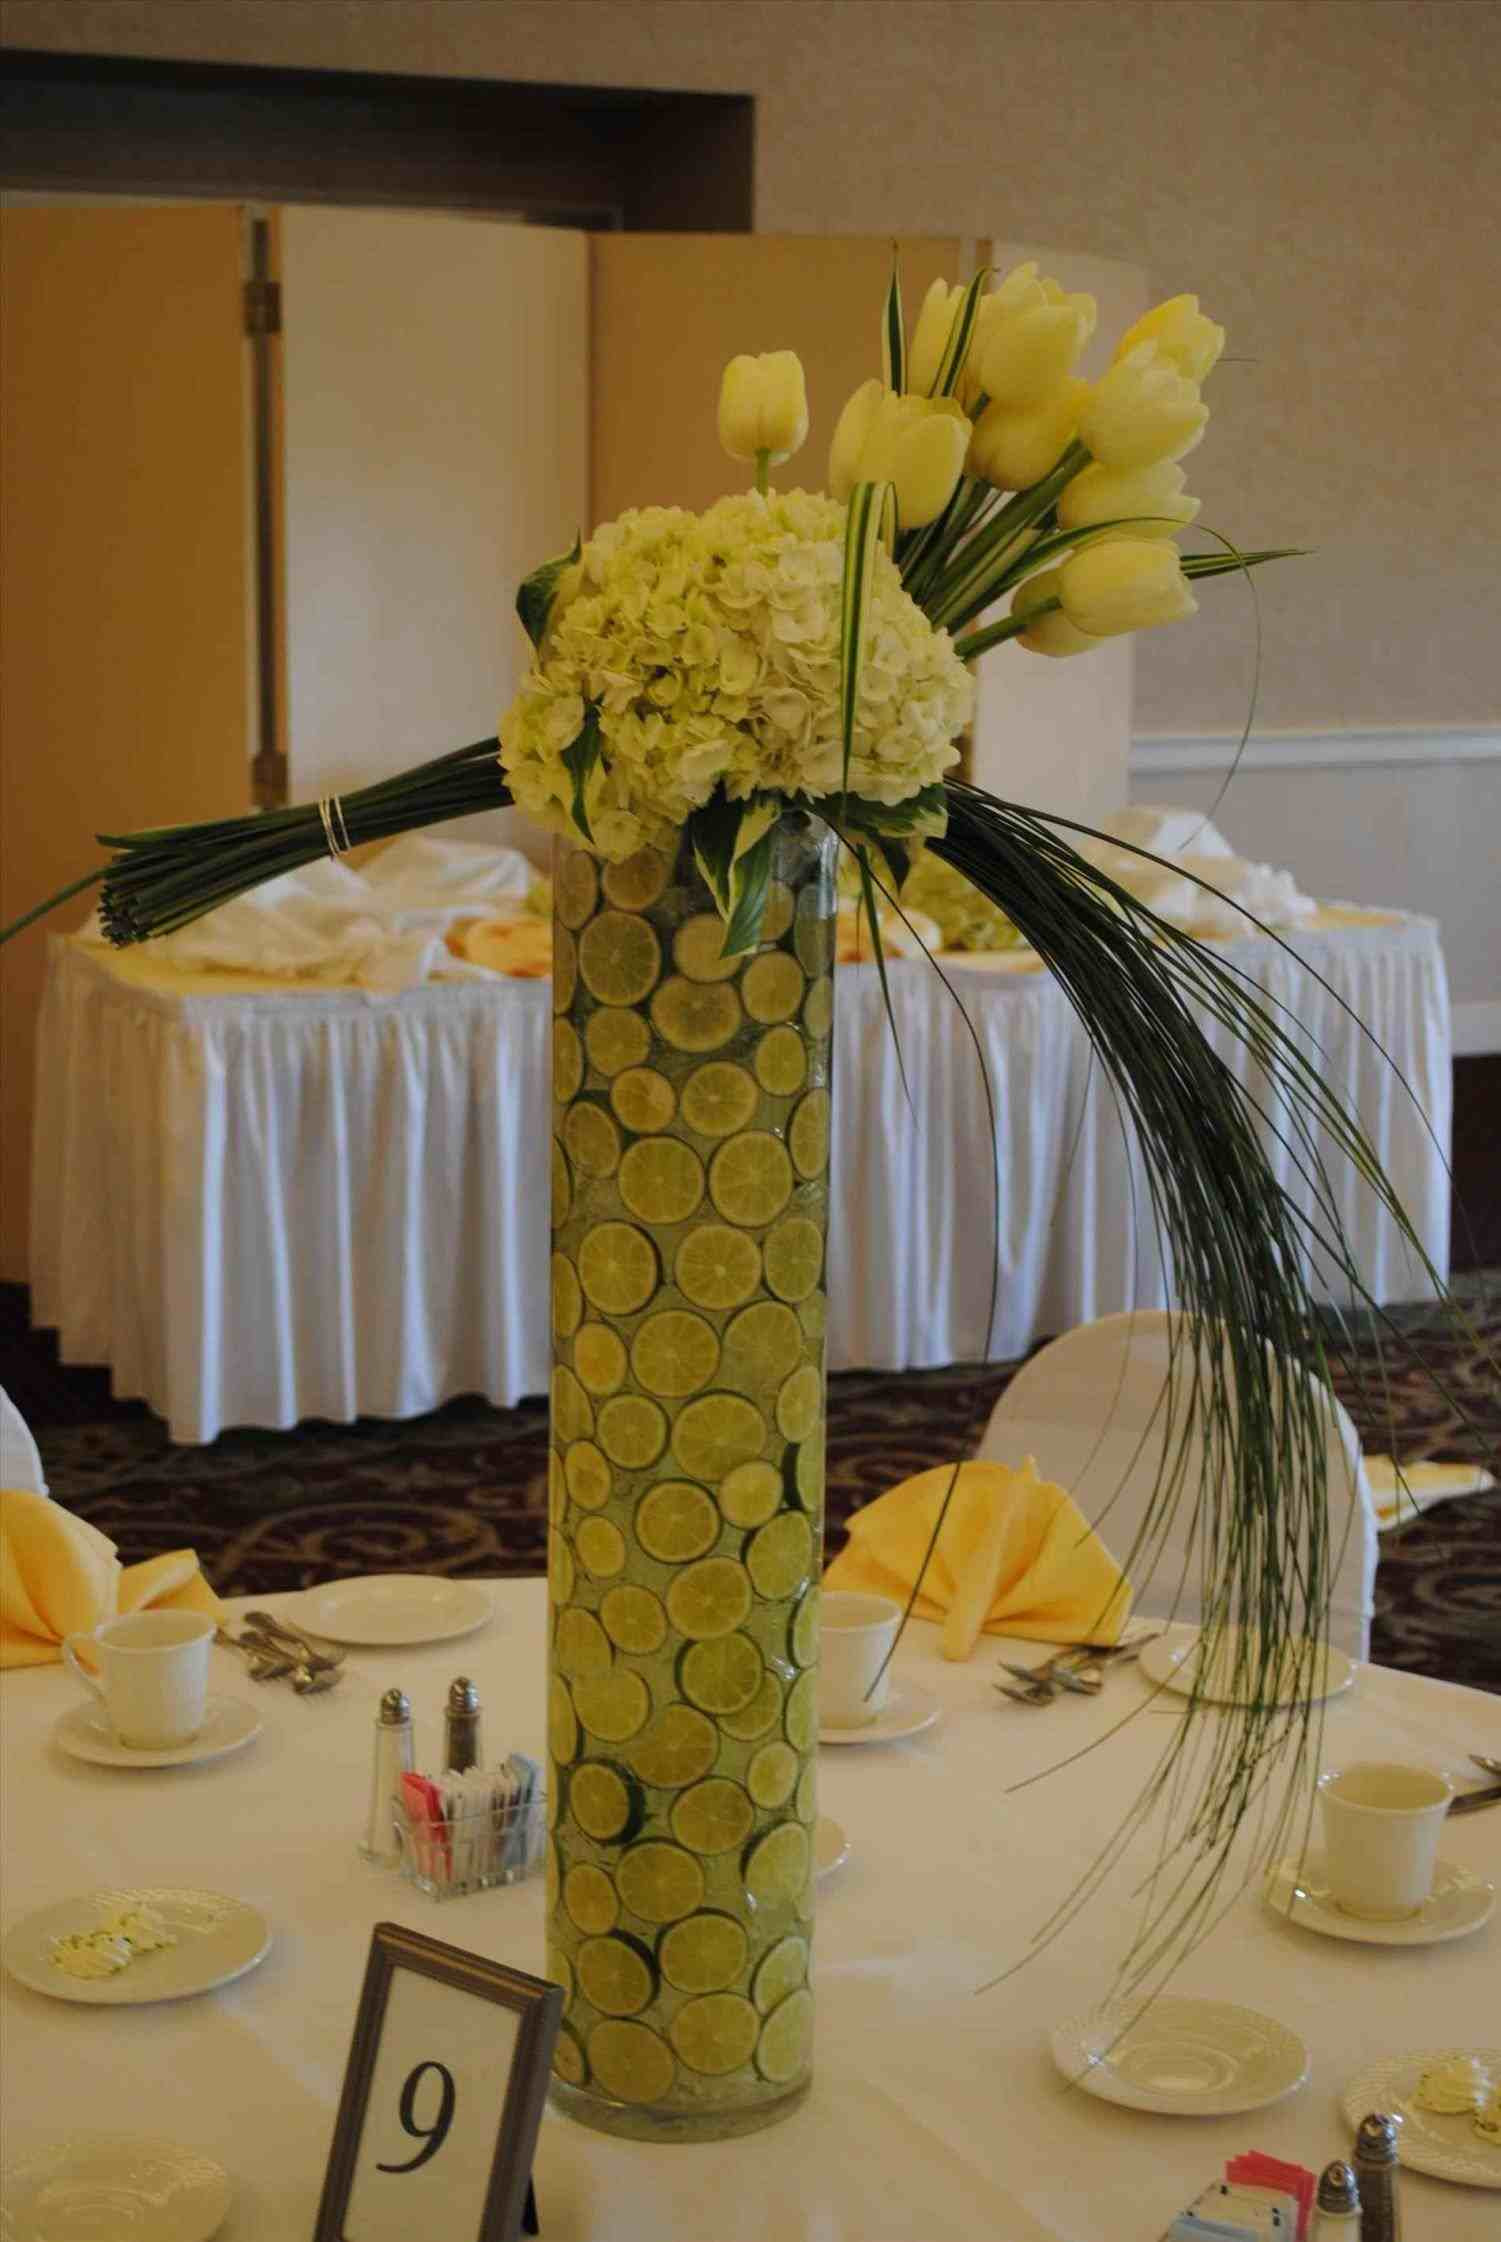 DIY Wedding Centerpieces Without Flowers
 spring centerpieces without flowers ARCH DSGN